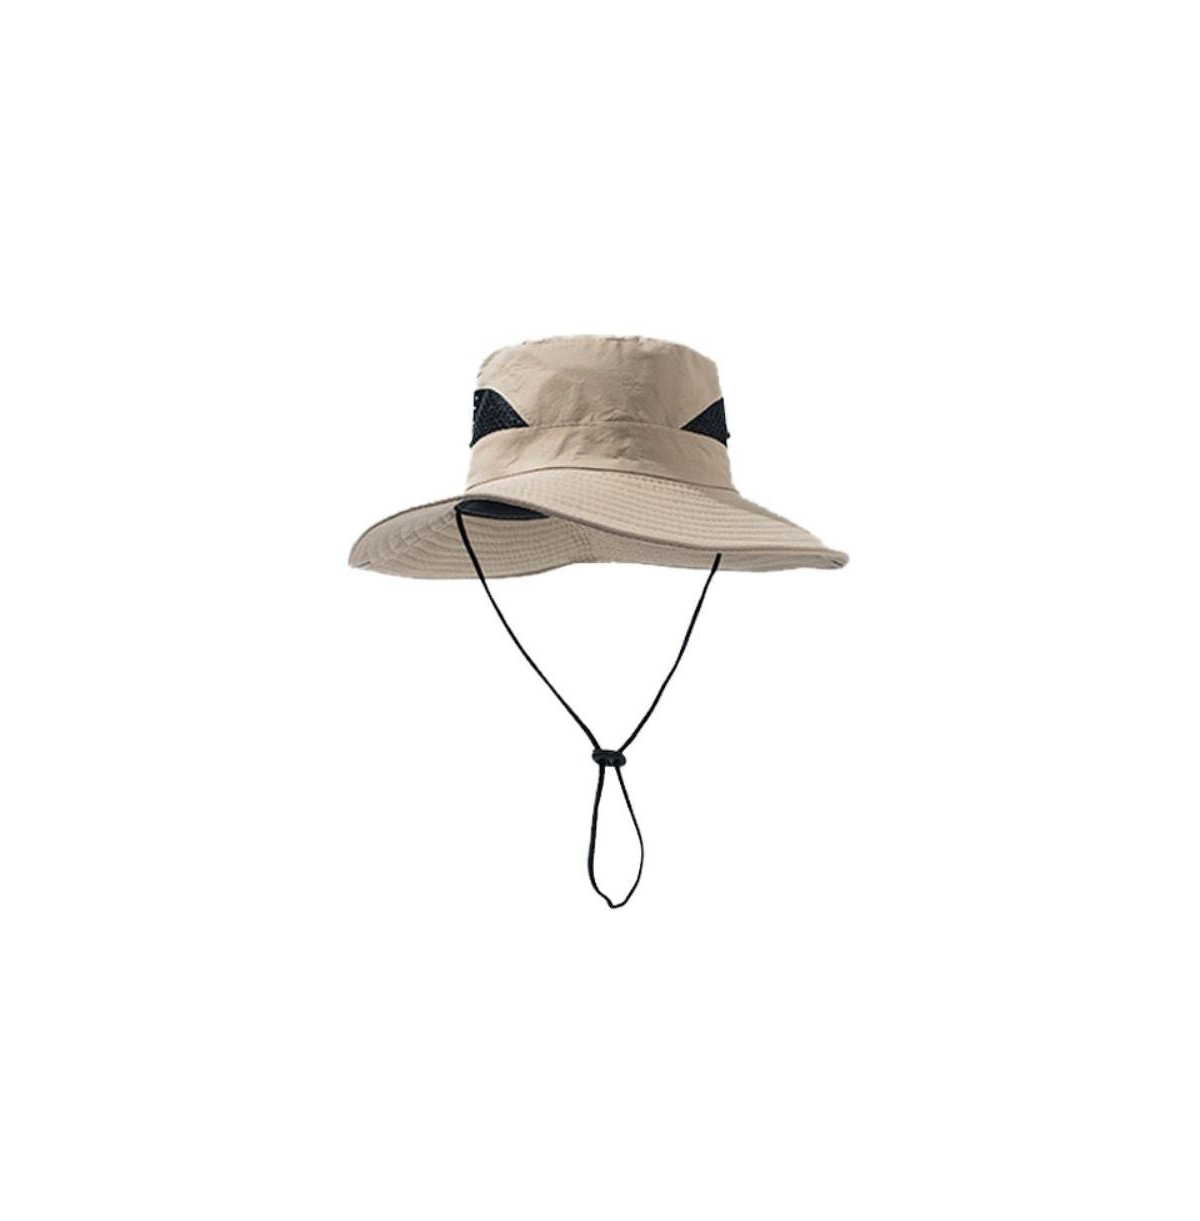 Unisex Wide Brim Quick-Dry Uv Protection Sun Fishing Hat - Olive